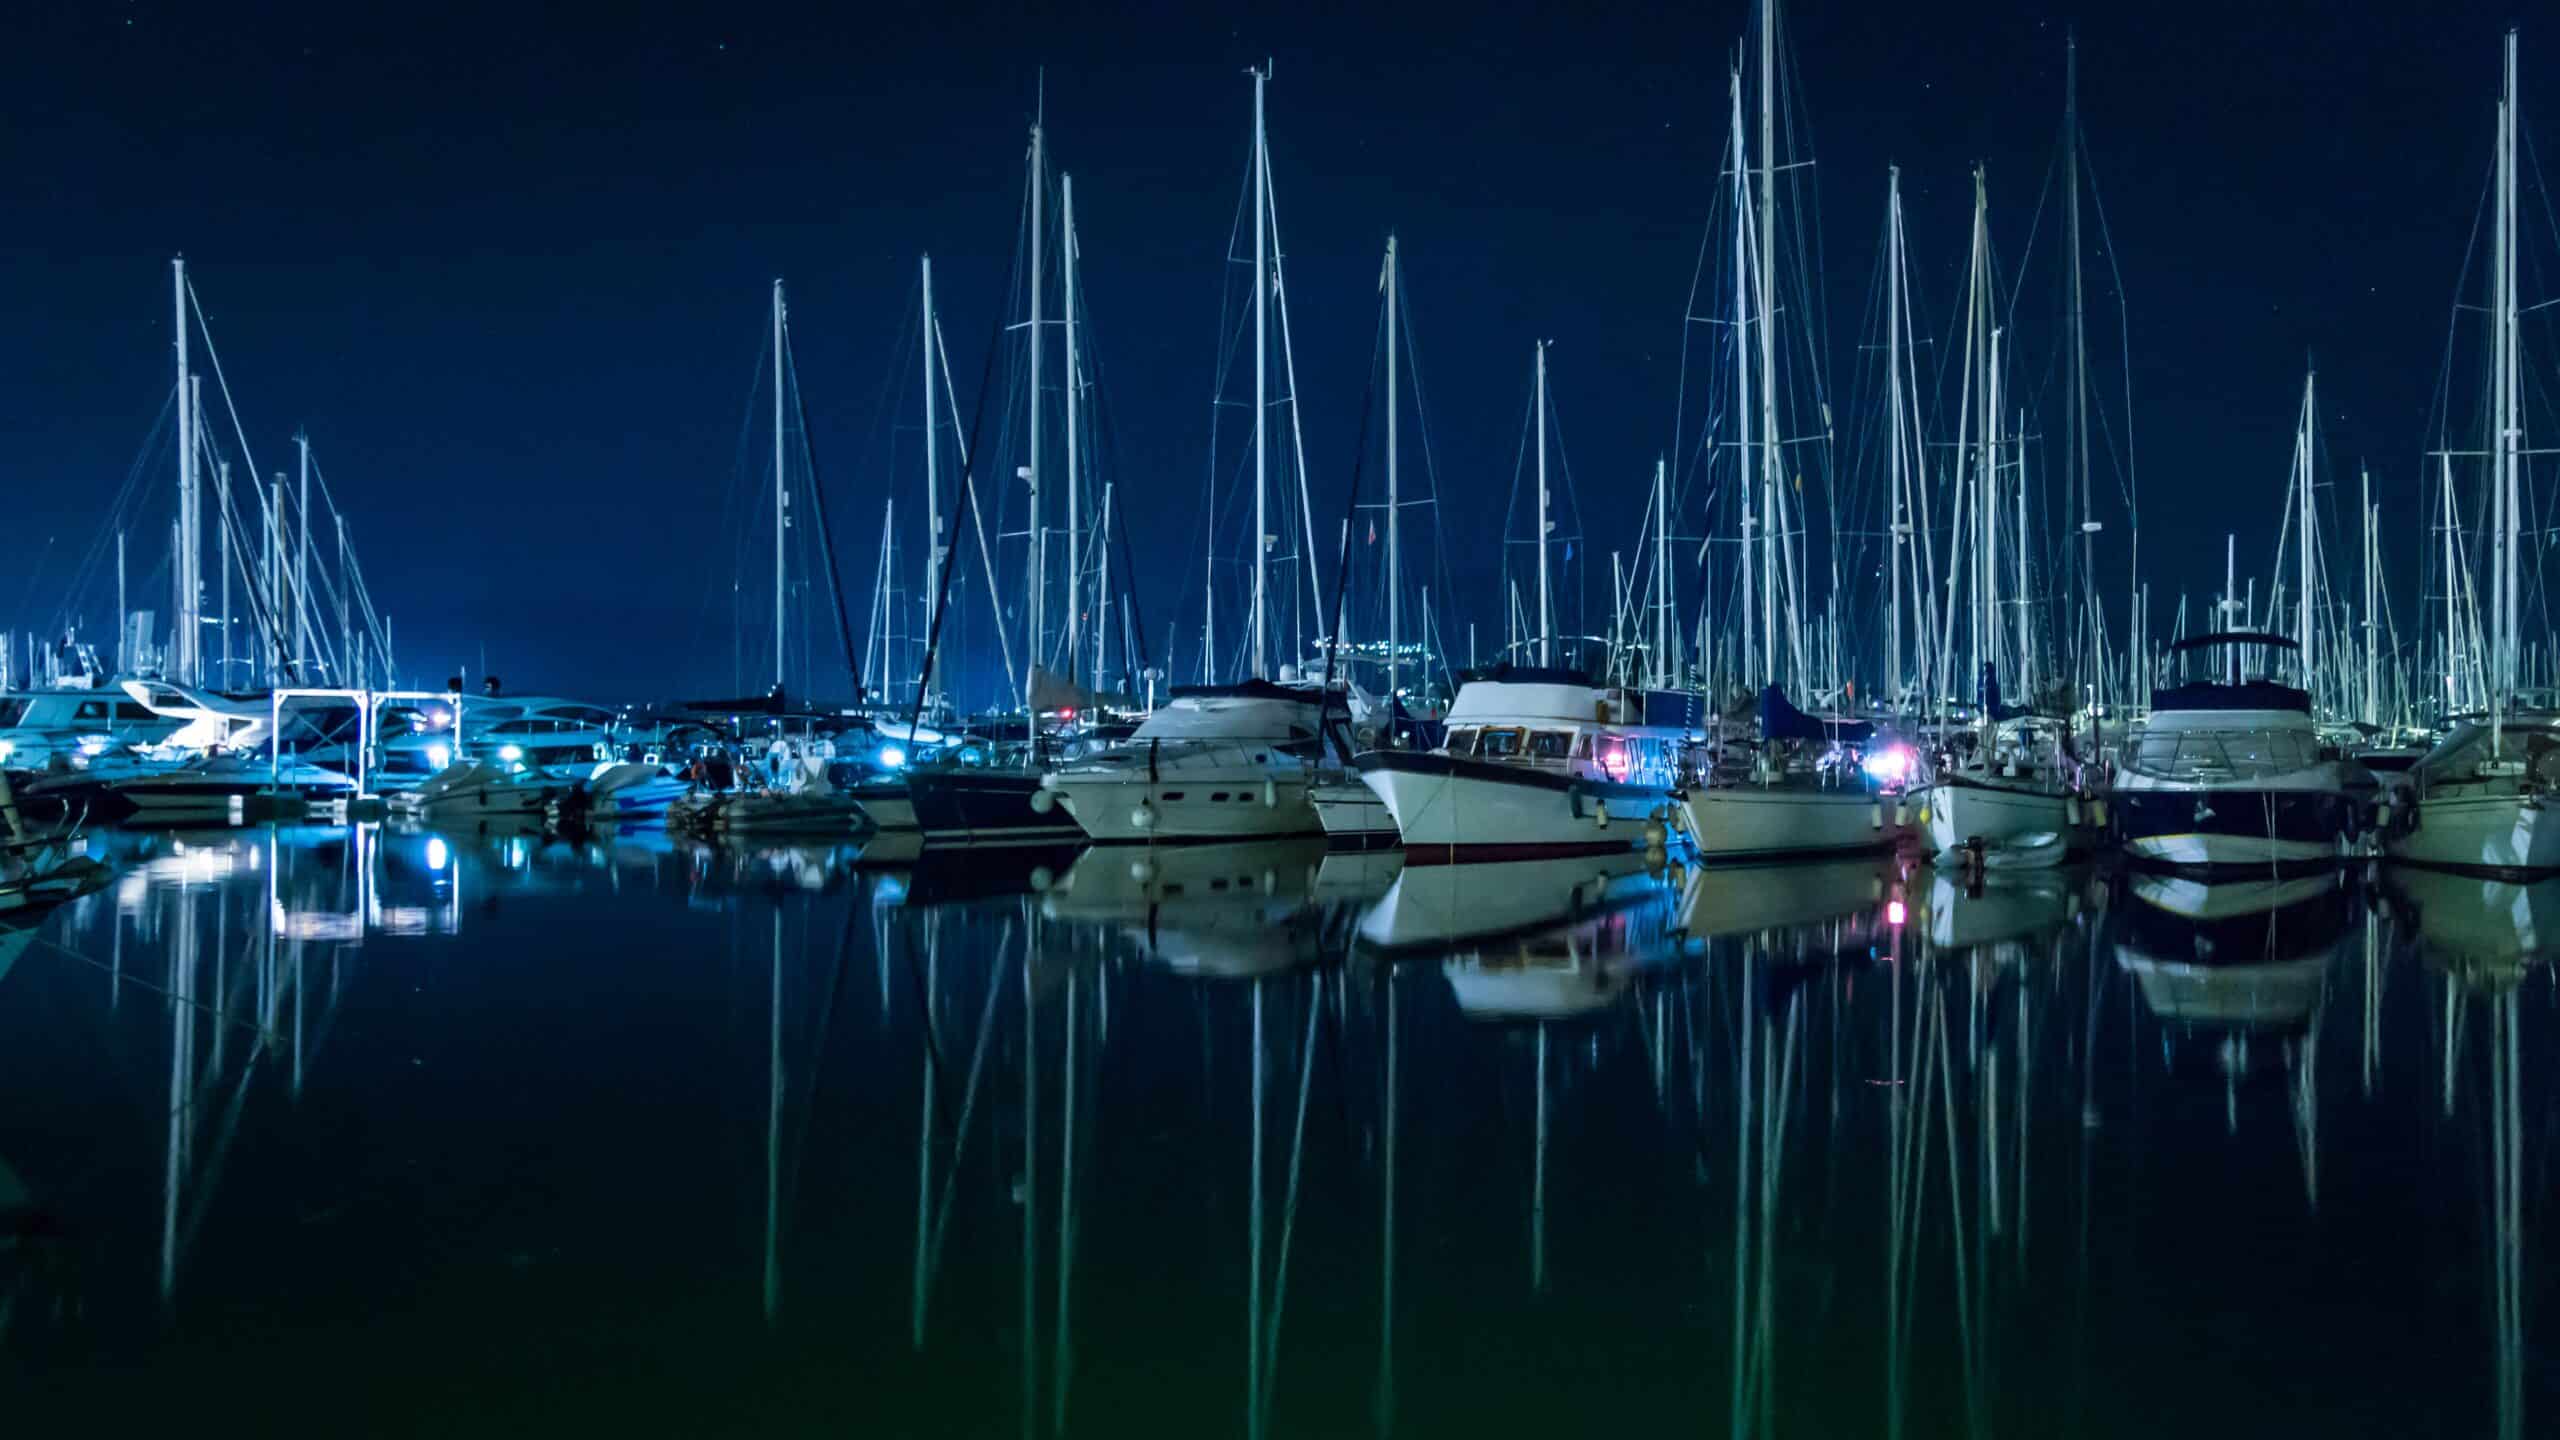 Picture Sailboats in a mooring at night time